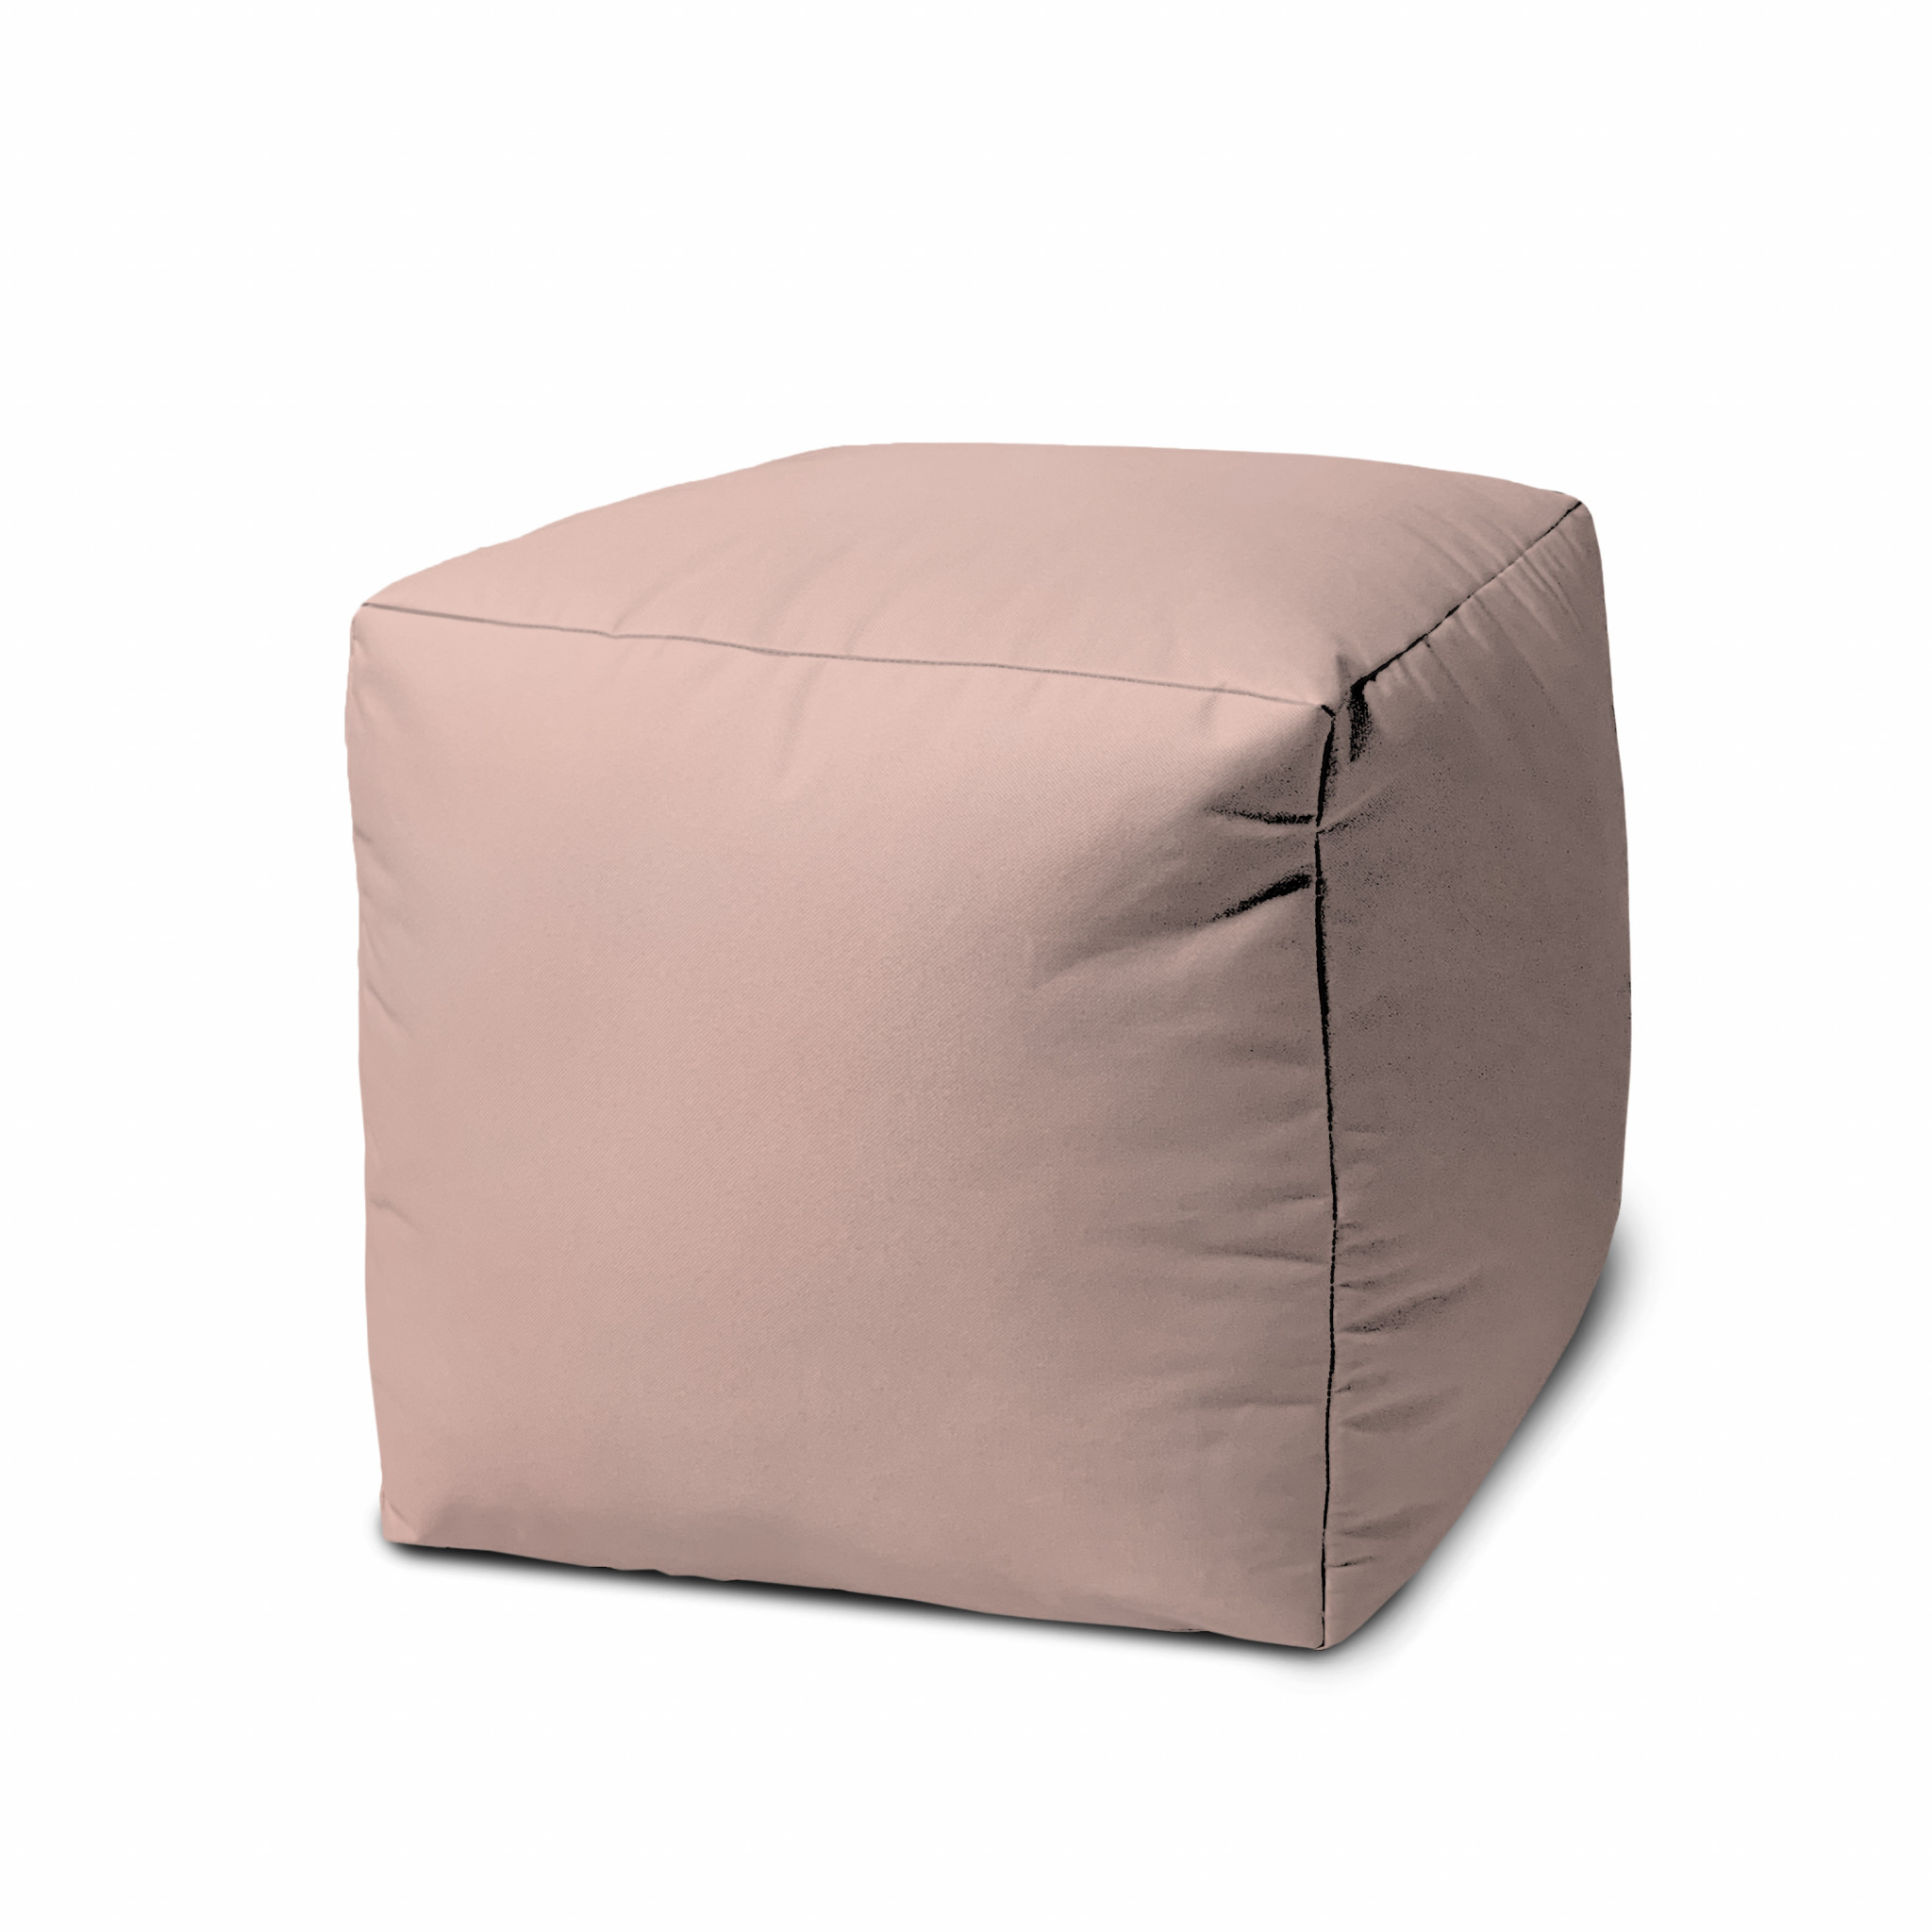 17" Cool Pale Pink Blush Solid Color Indoor Outdoor Pouf Ottoman-474192-1